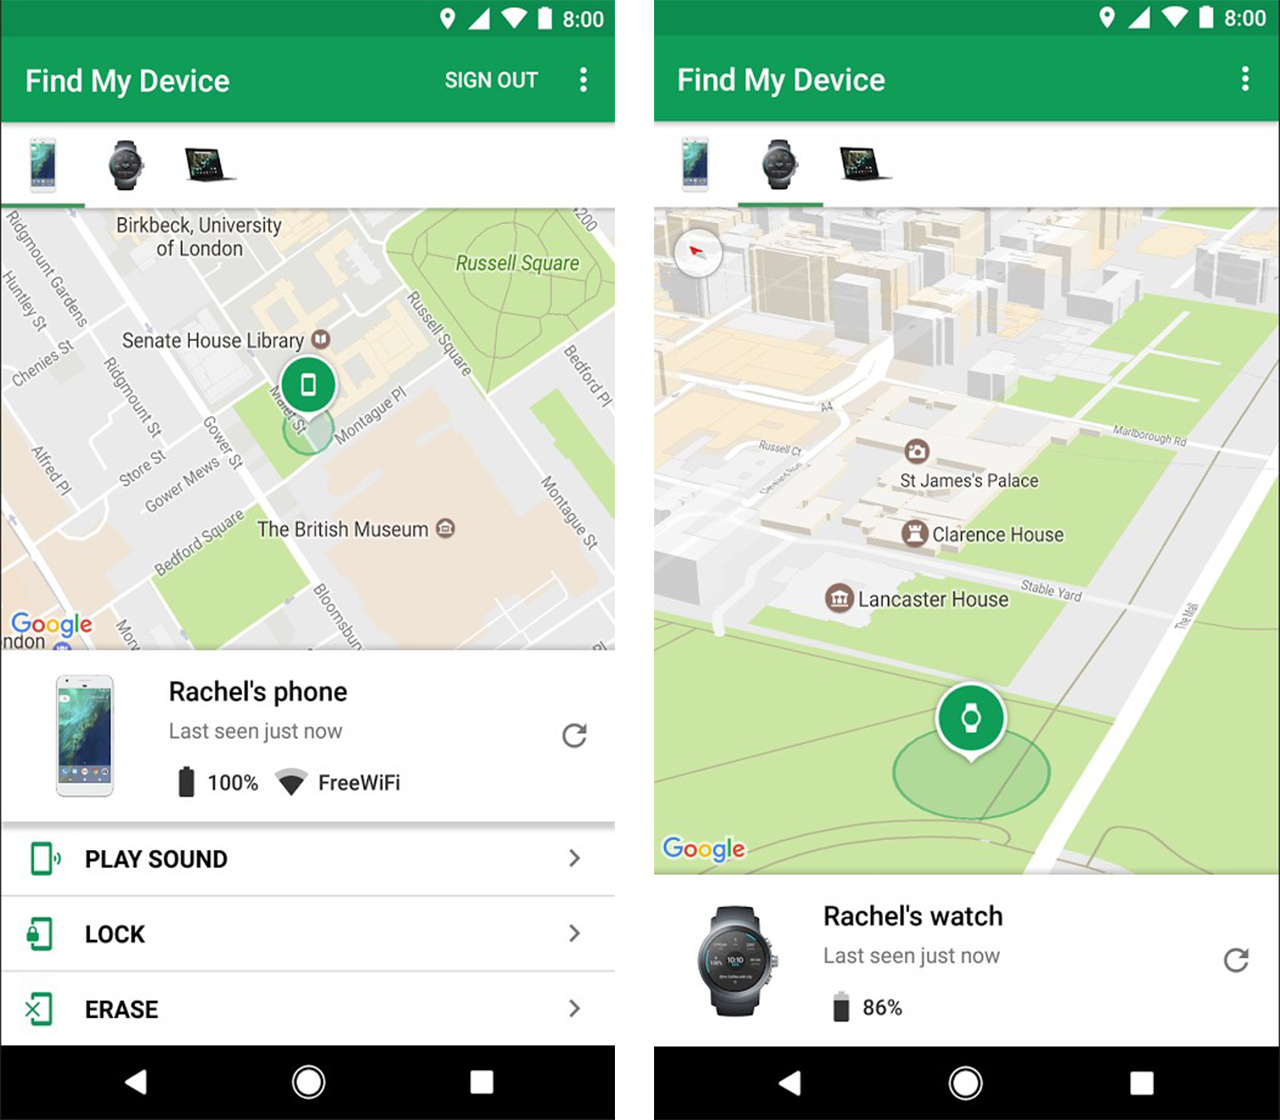 Screenshots of Google's redesigned Find My Device app